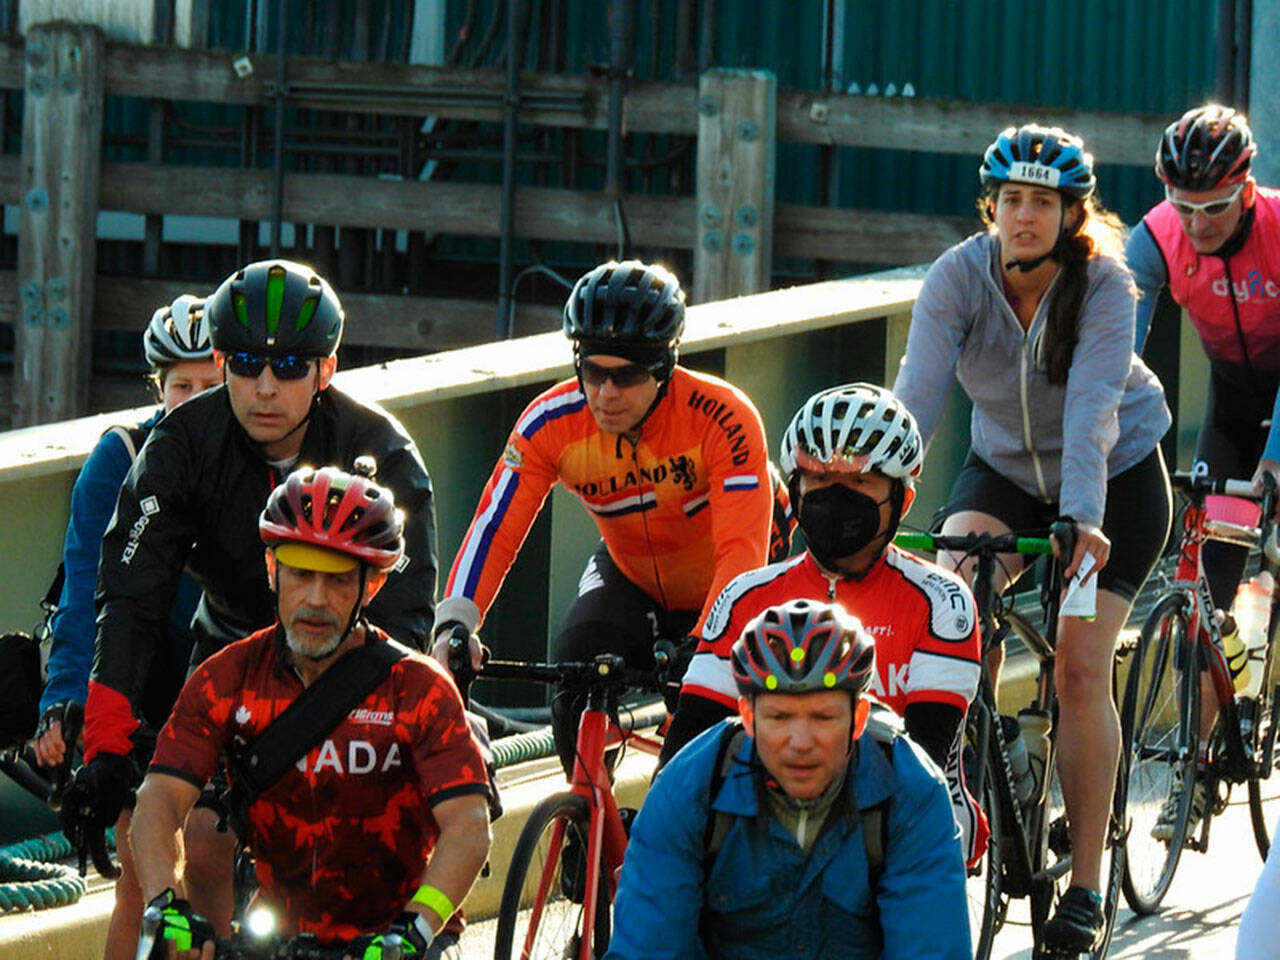 Cascade Bicycle Club courtesy photos
Riders embark on their journey during the 2022 Kitsap Color Classic.